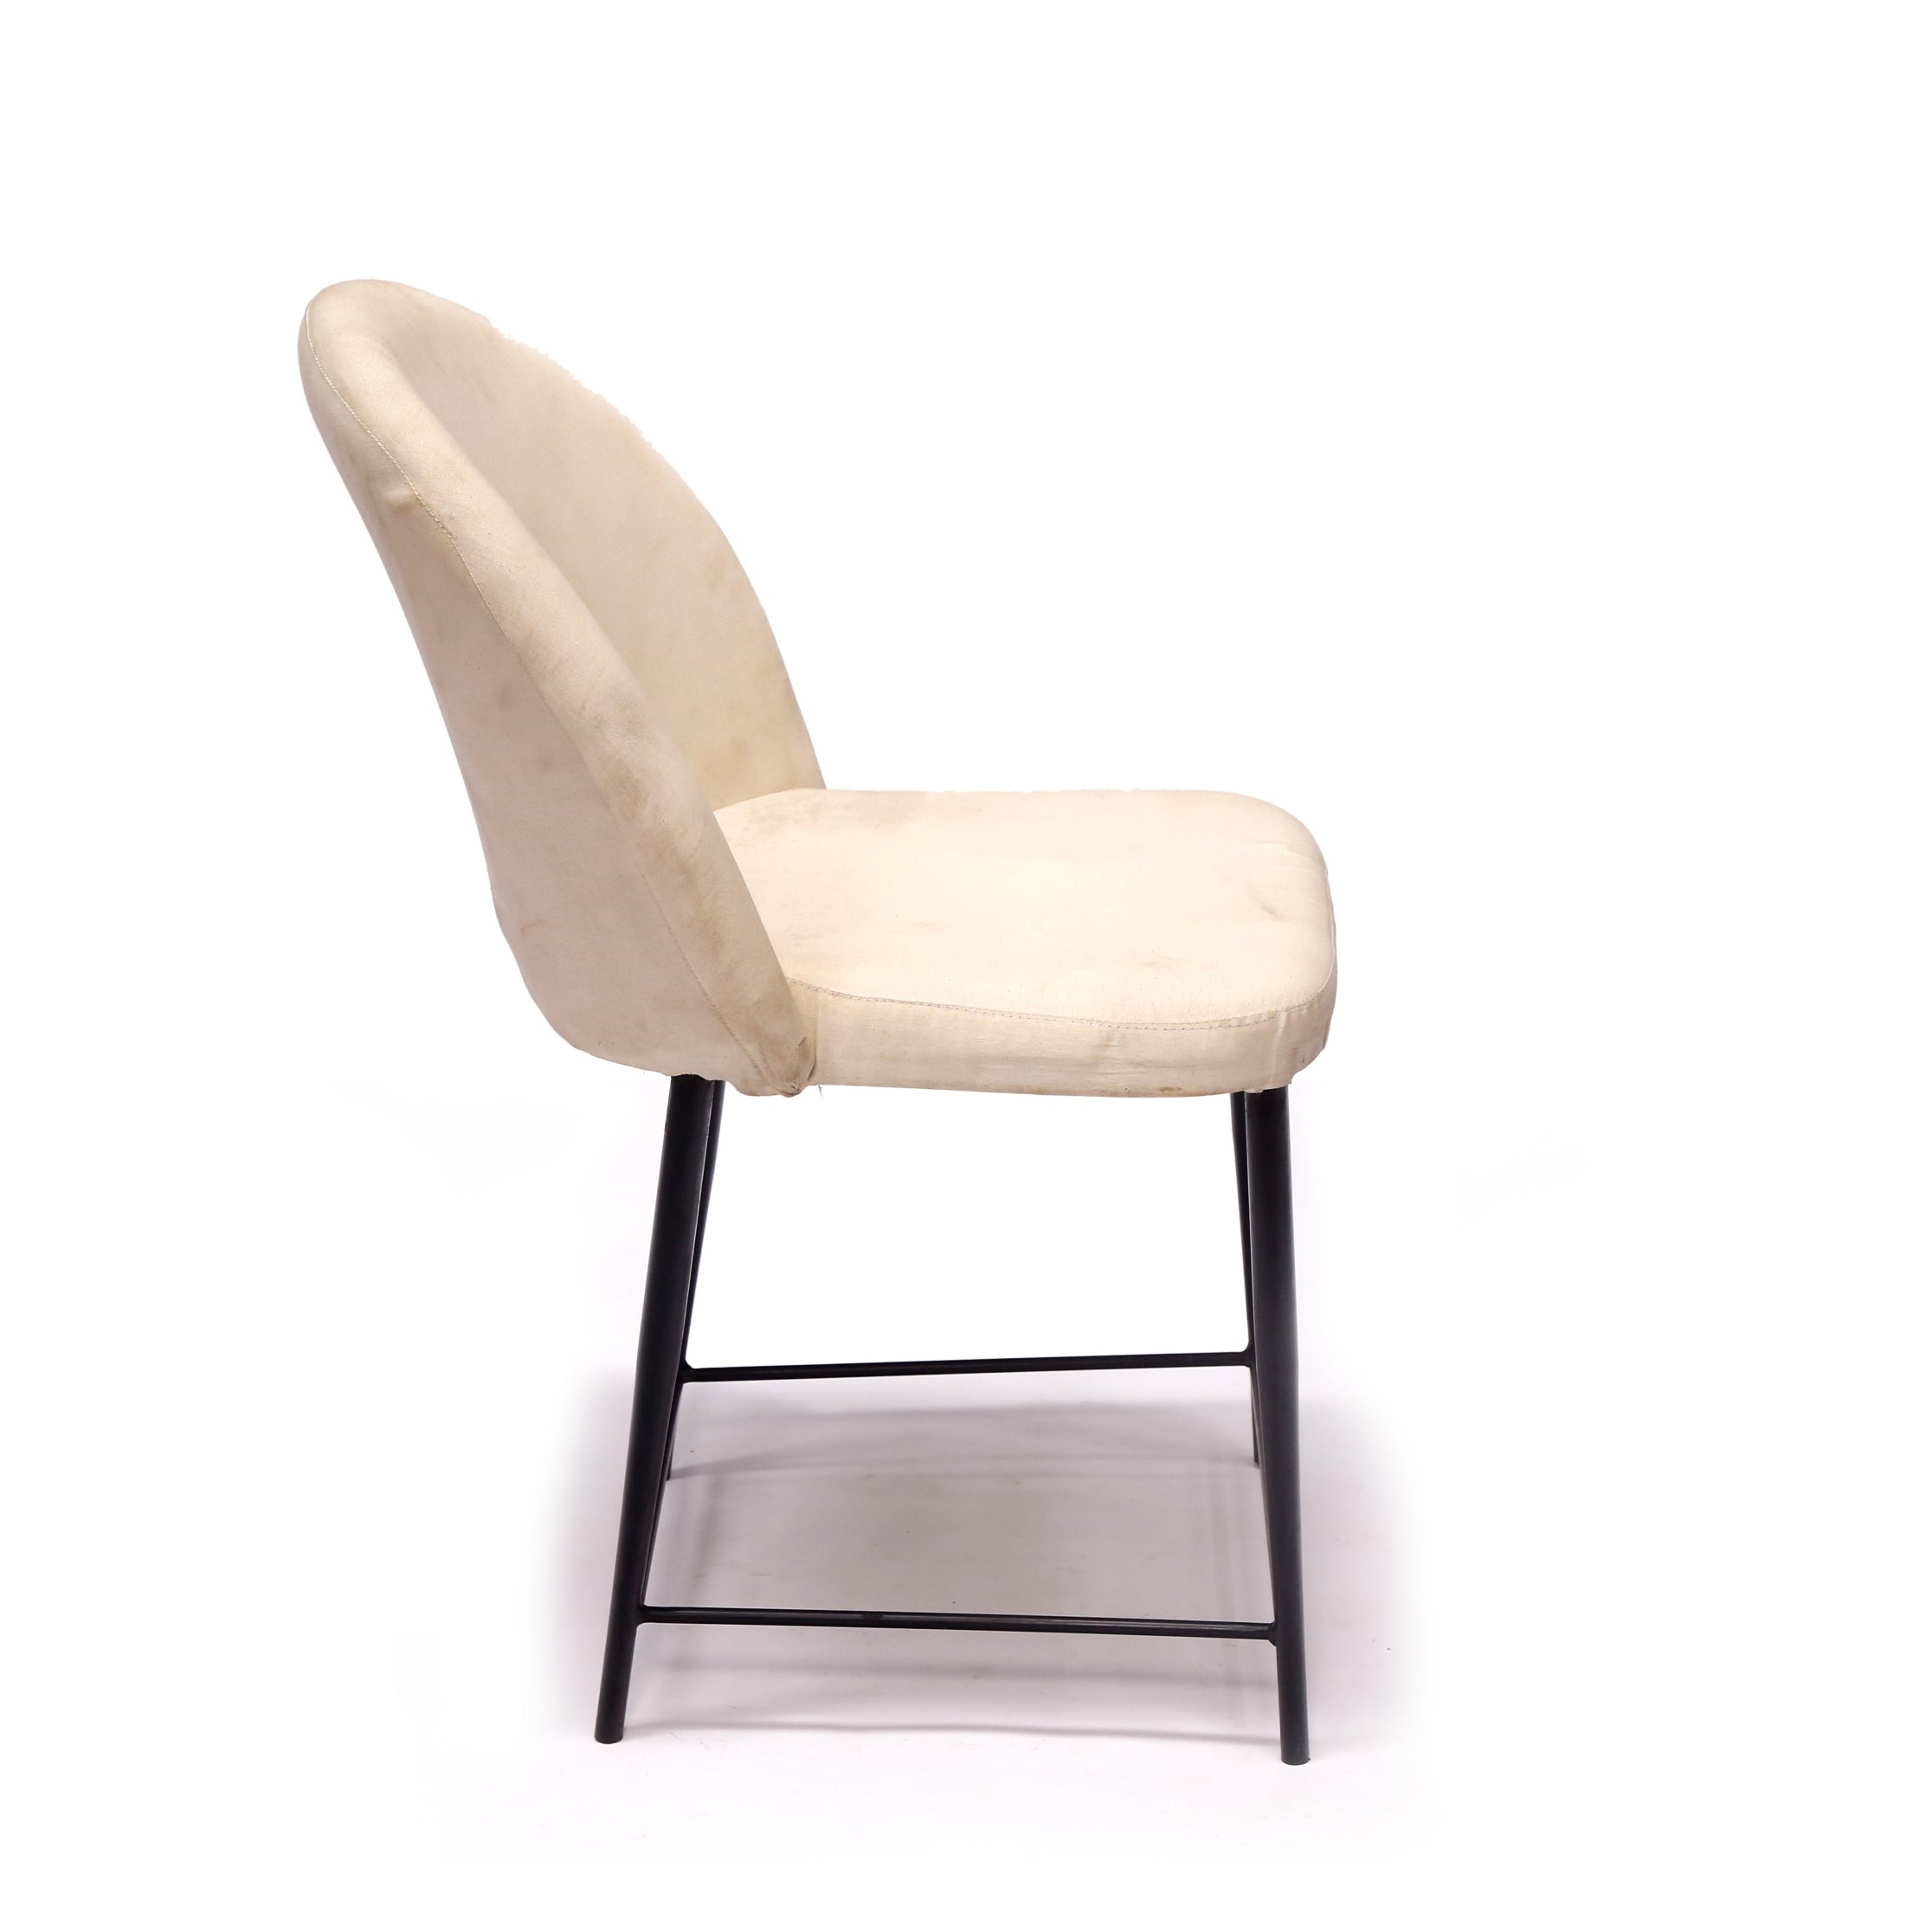 Fully White Cover Metal Chair Arm Chair